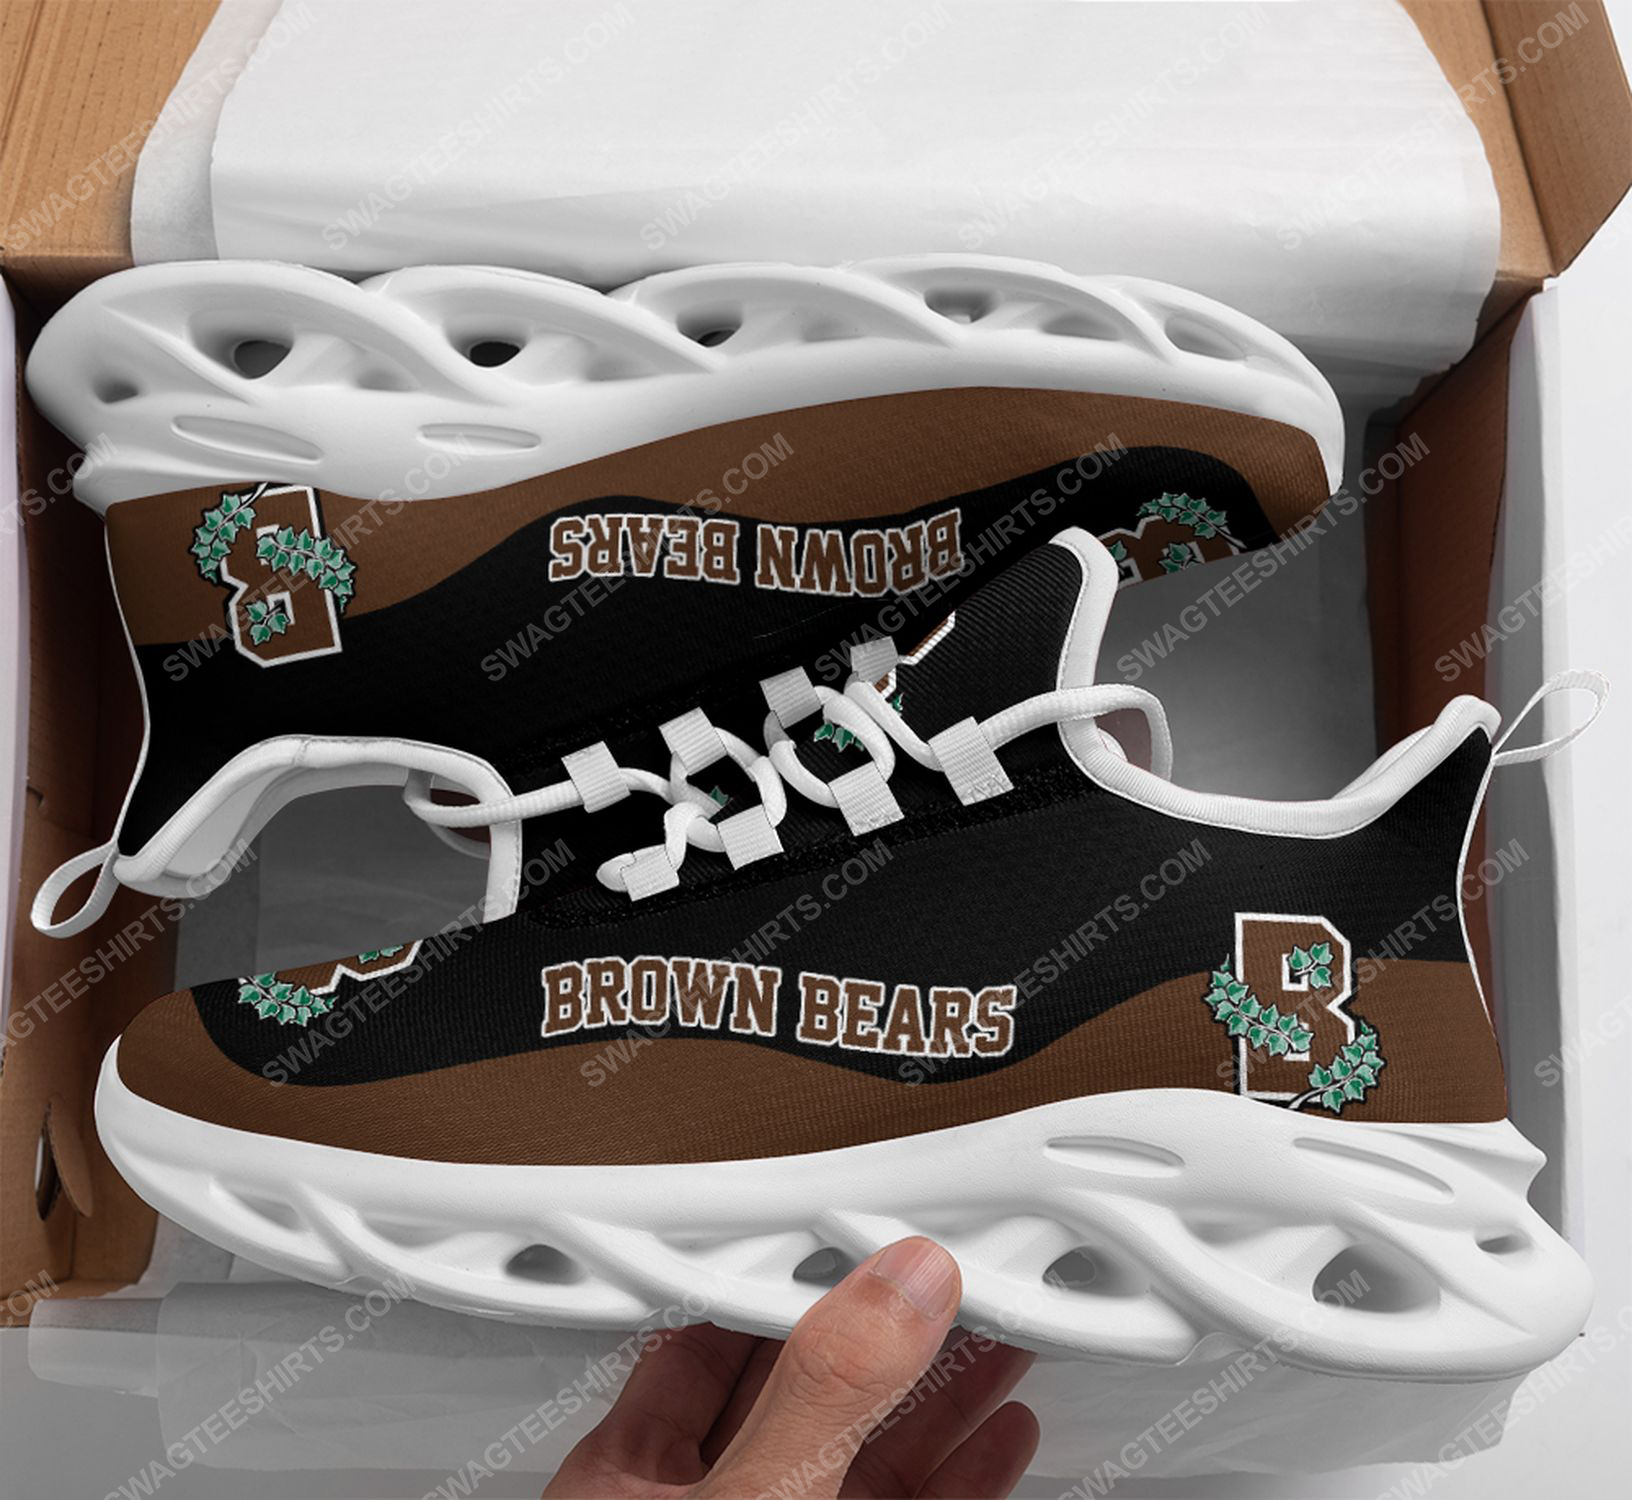 The brown bears football team max soul shoes 1